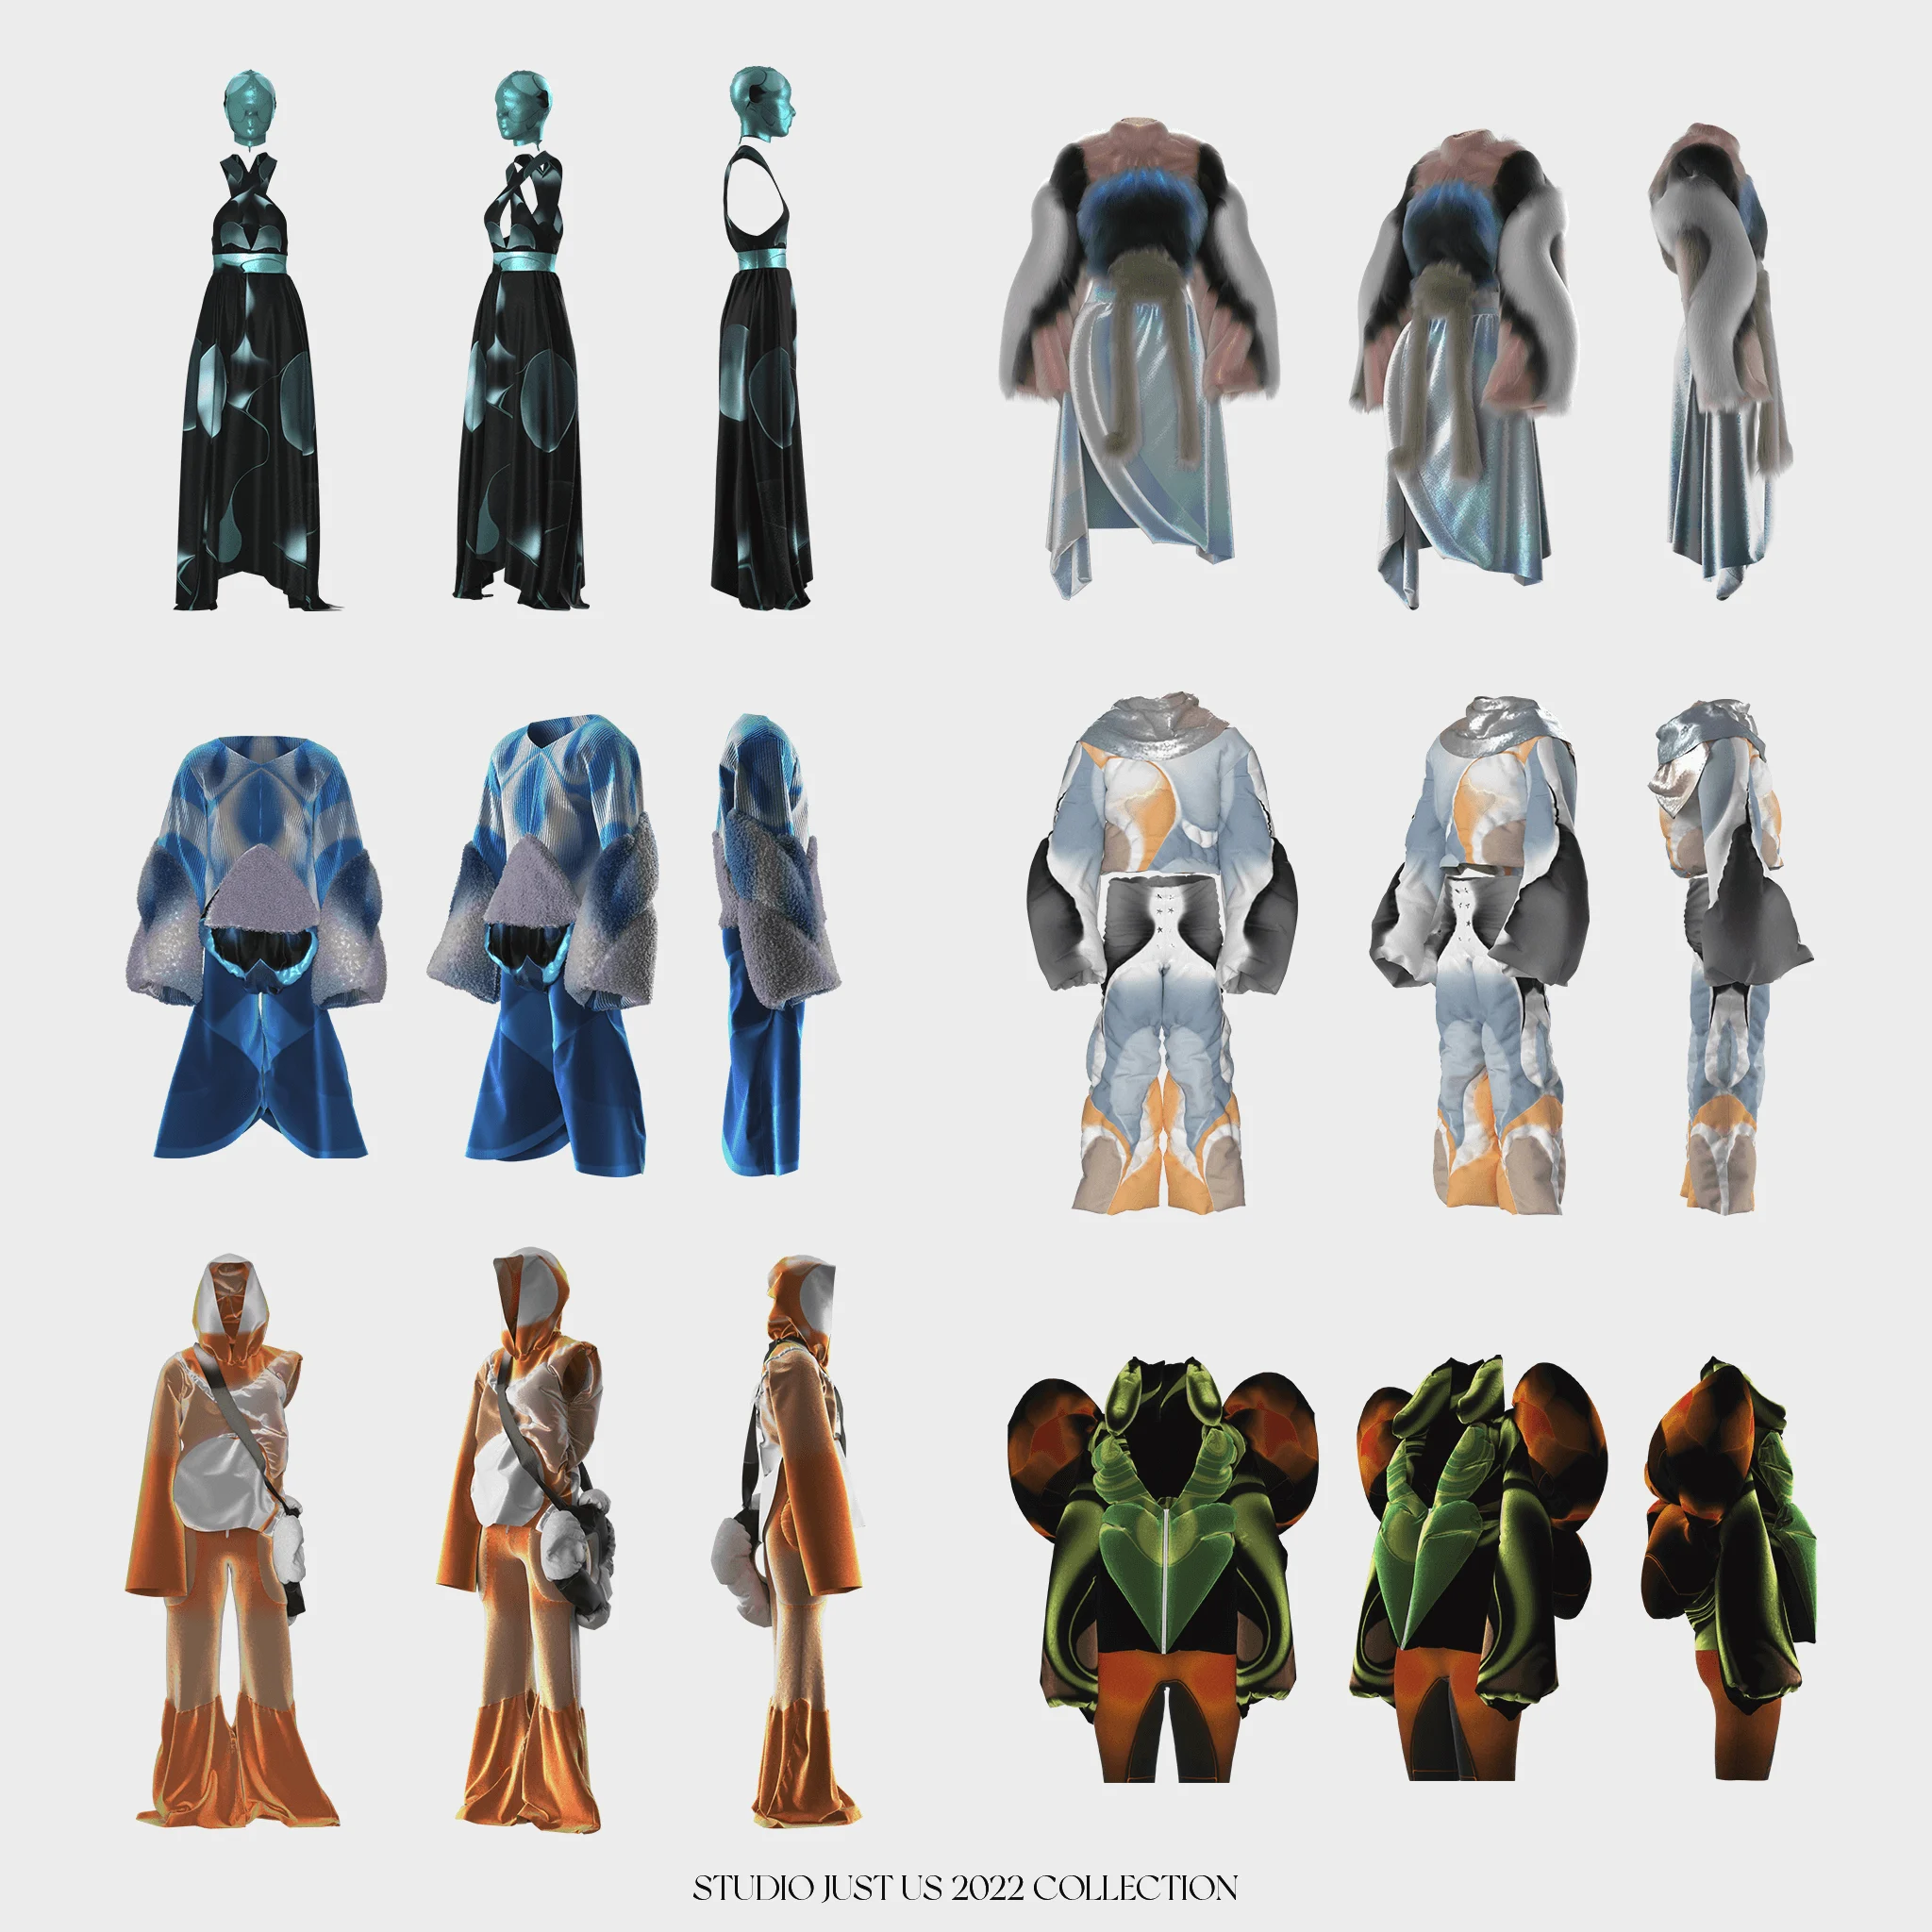 A digitally-rendered image showing a selection of angles of six different outfits, with the words "Studio Just Us 2022 Collection" written underneath them.